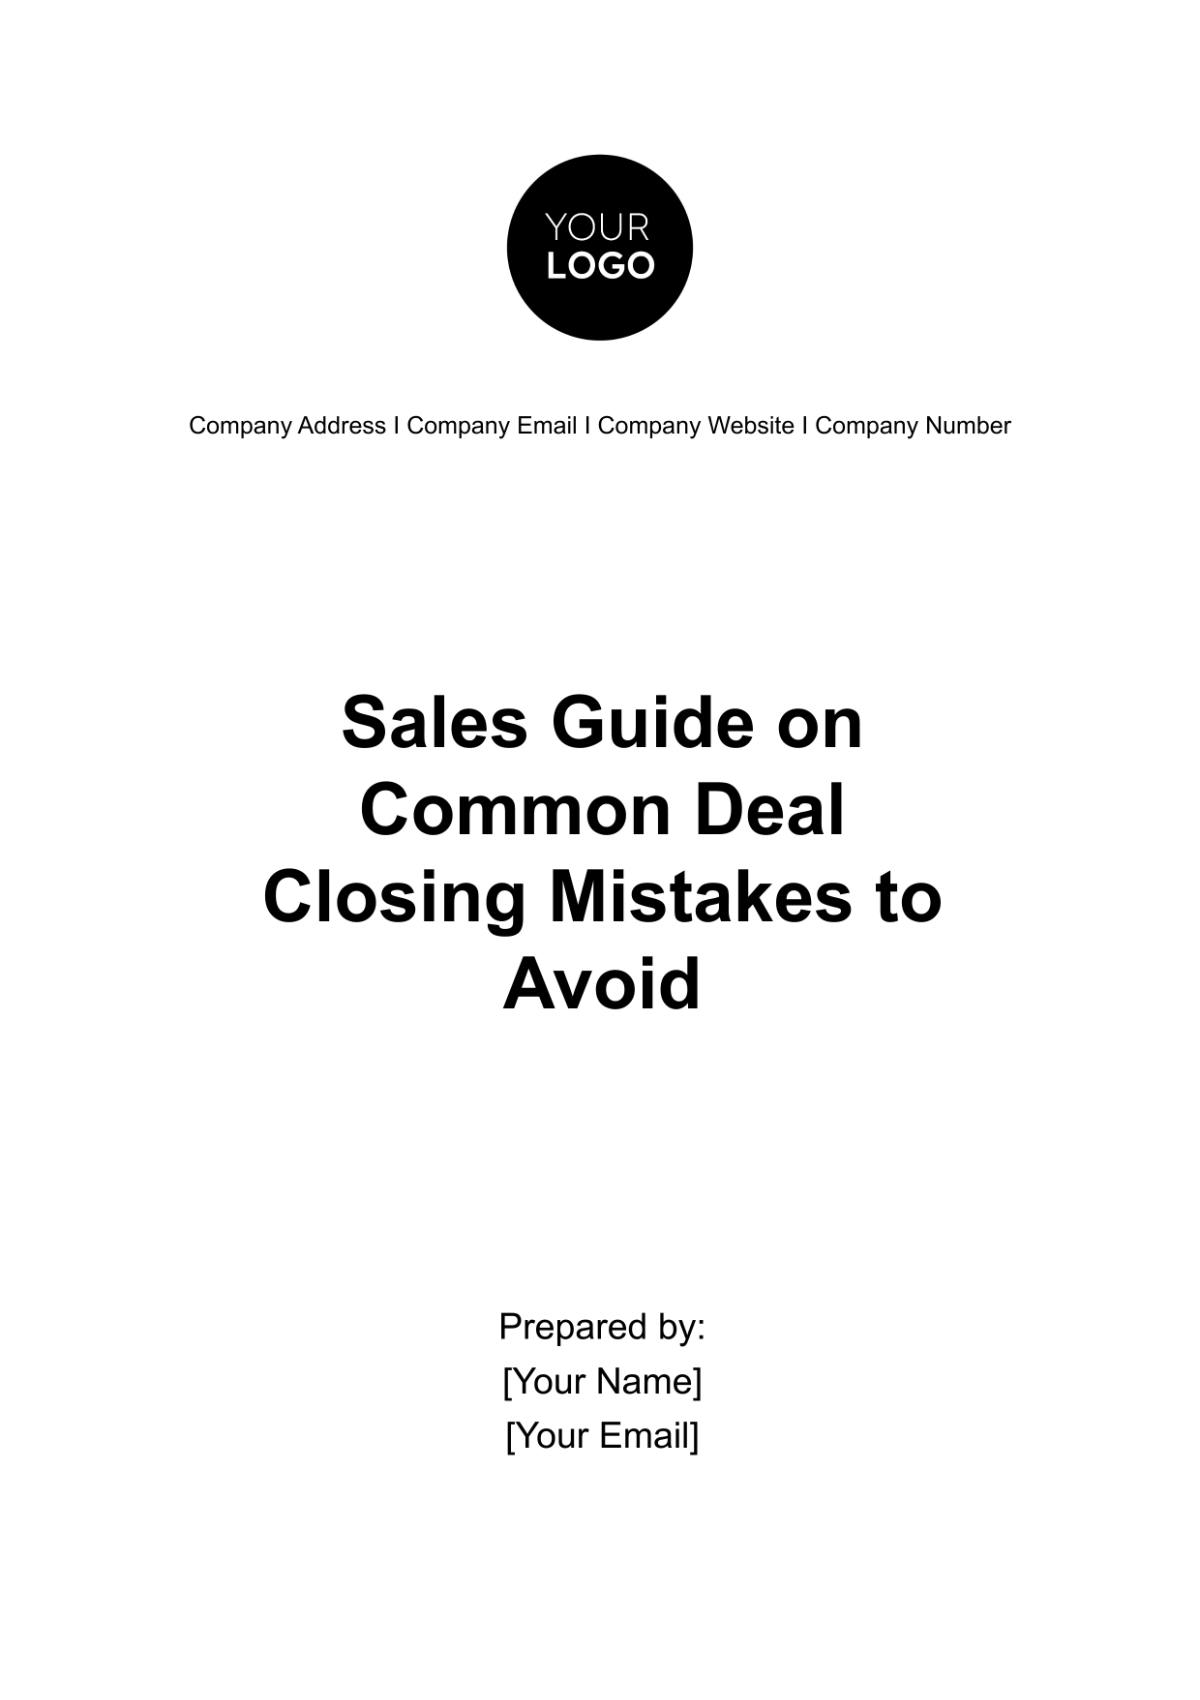 Sales Guide on Common Deal Closing Mistakes to Avoid Template